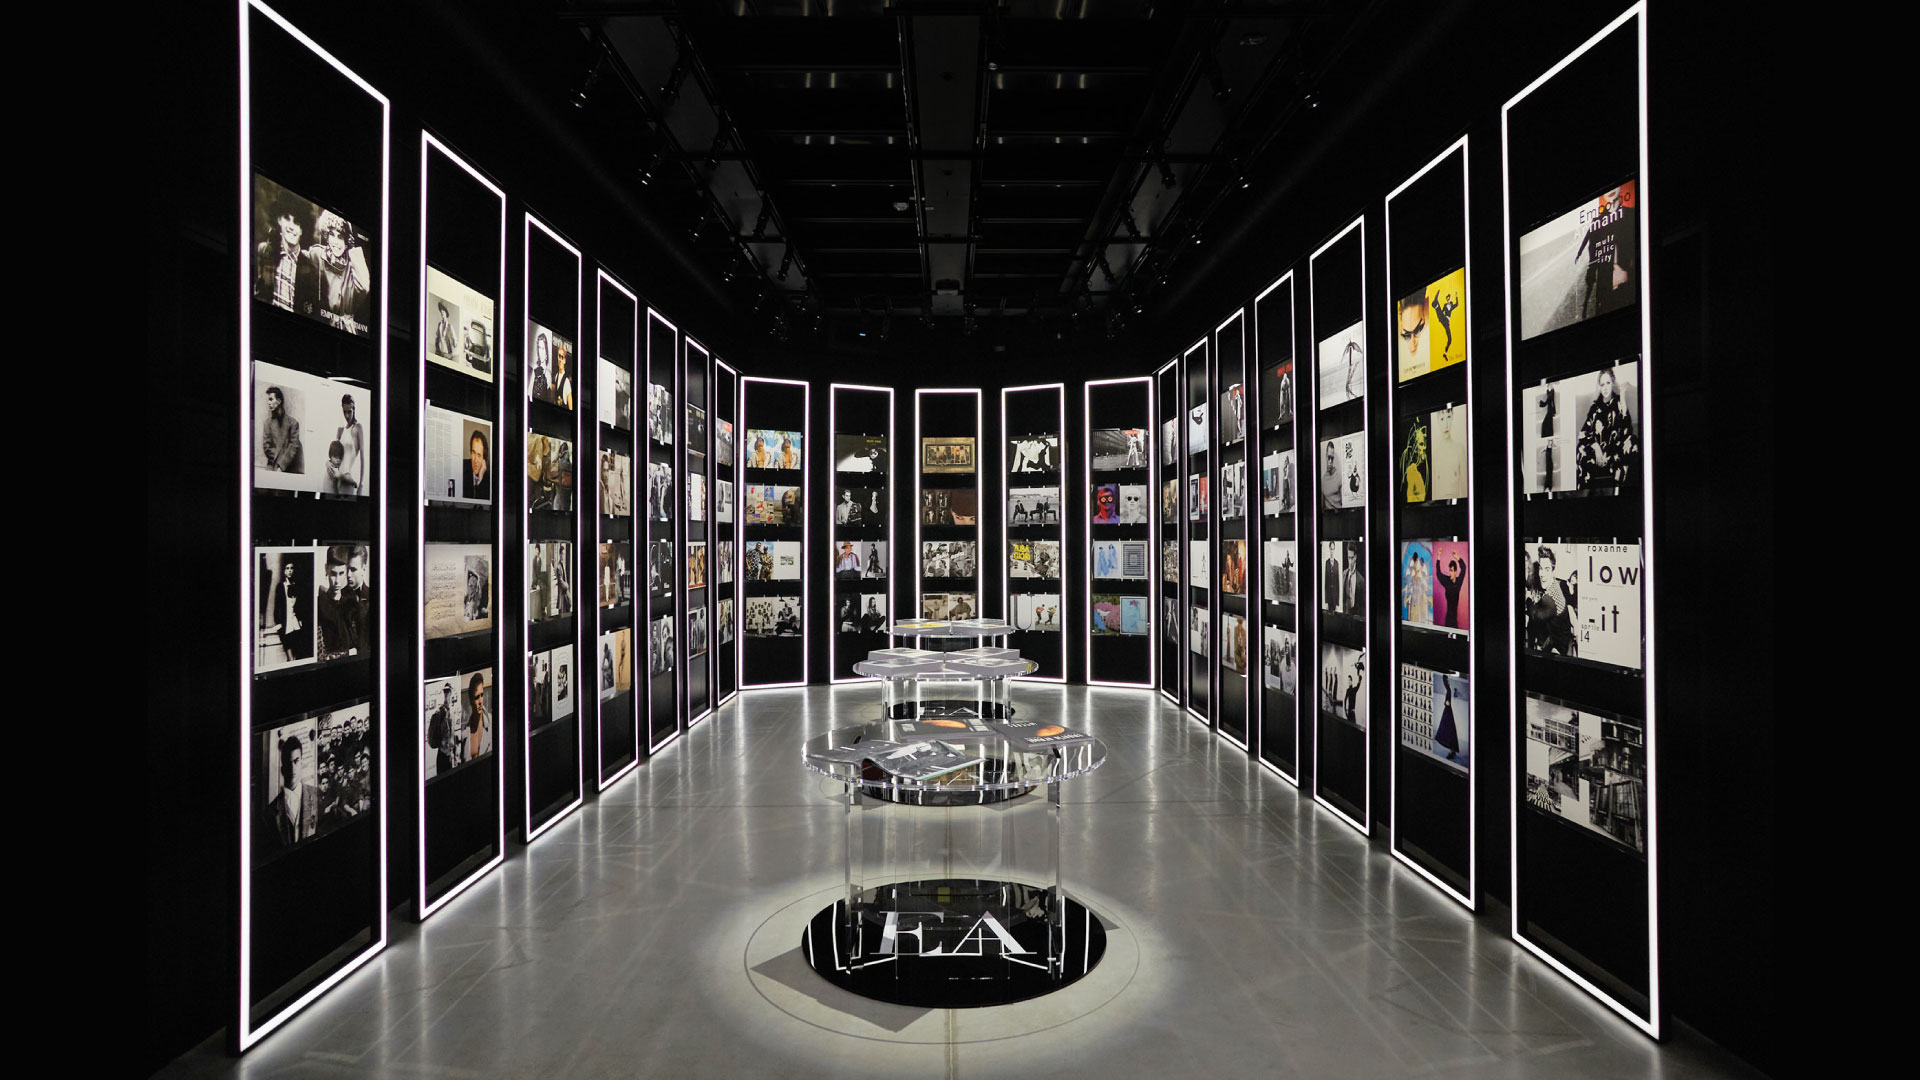 Giorgio Armani curates 'The Way We Are' as a tour of the brand's iconic designs